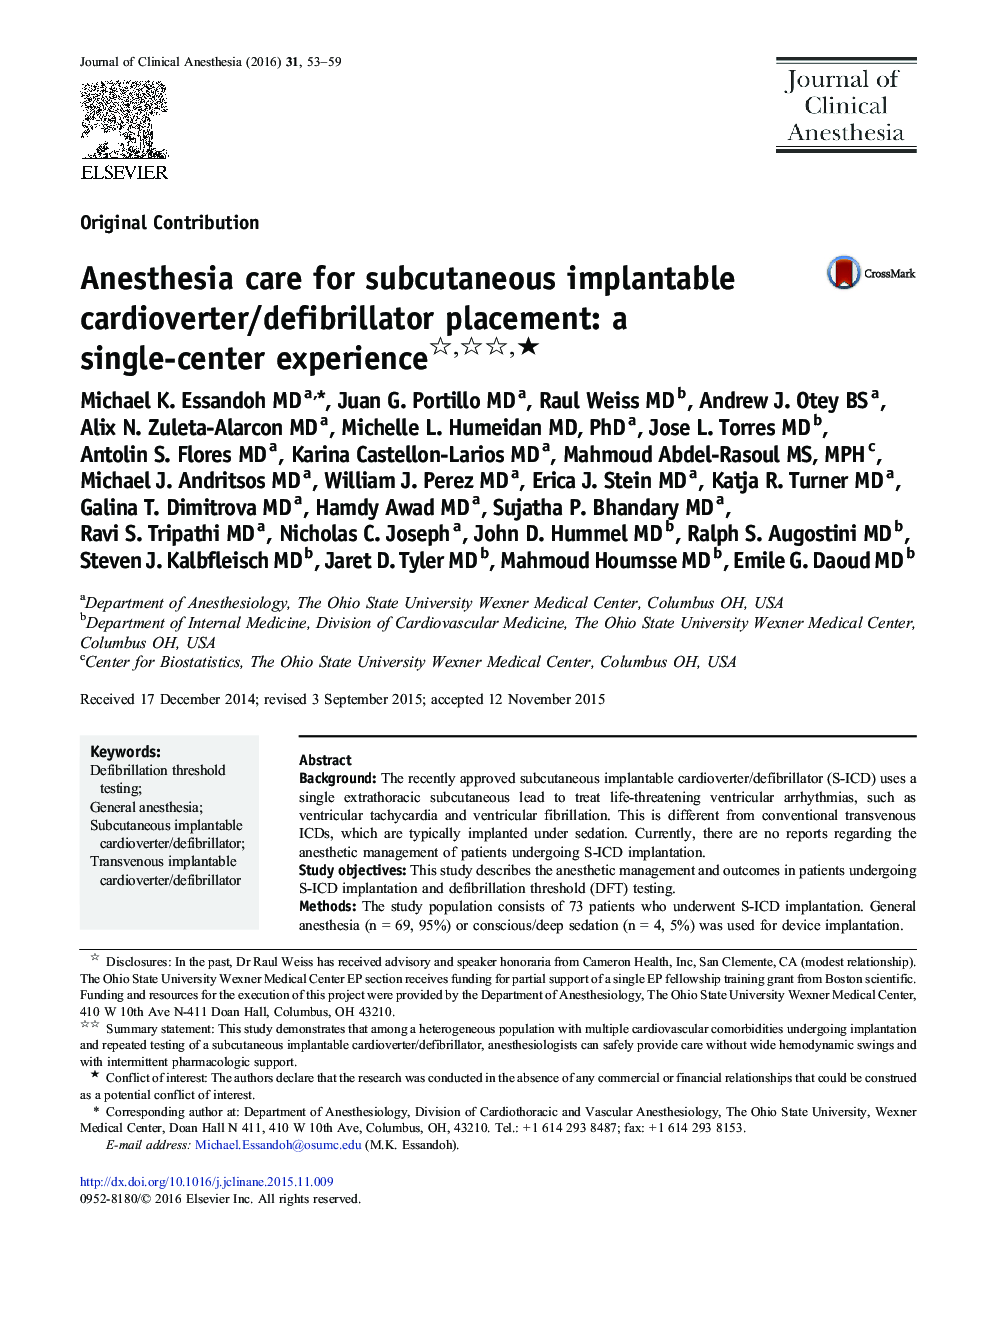 Anesthesia care for subcutaneous implantable cardioverter/defibrillator placement: a single-center experience